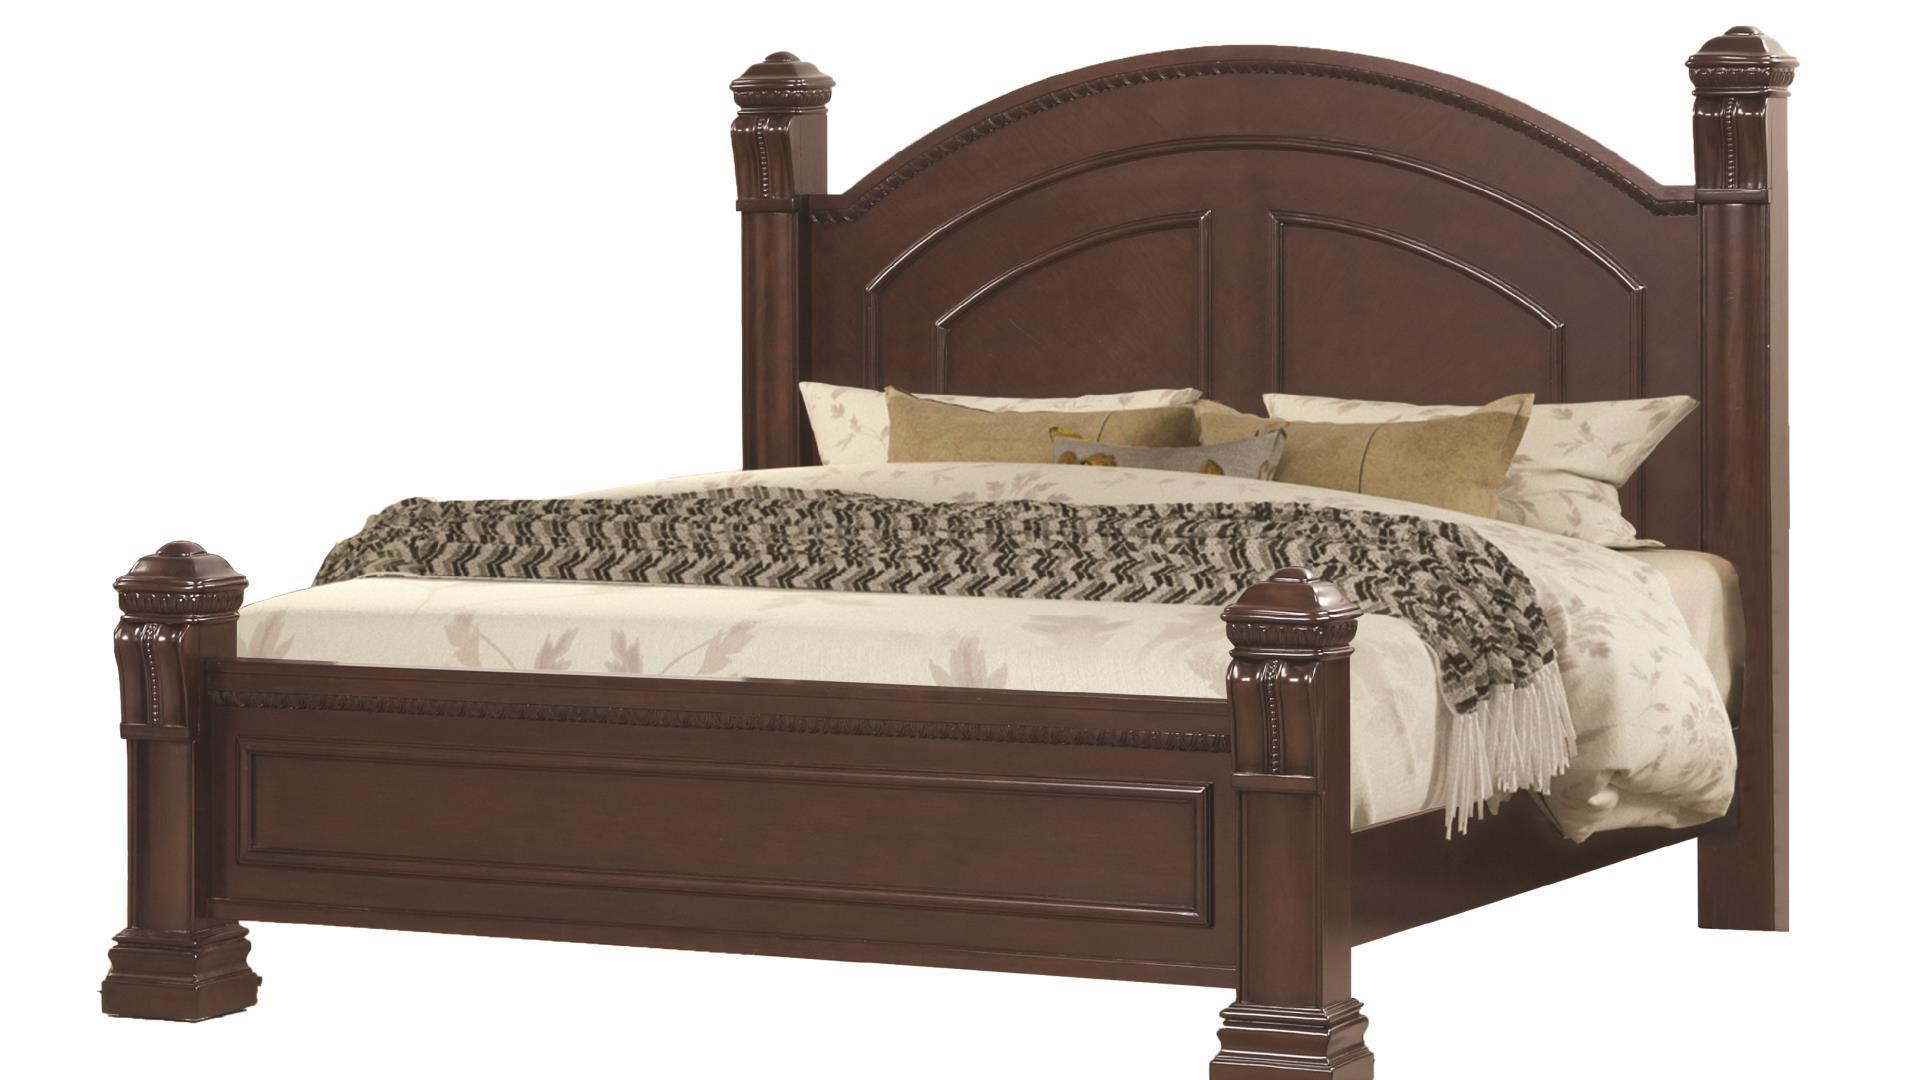 

    
Cherry Solid Wood King Bedroom Set 4Pcs Aspen Galaxy Home Traditional Classic
